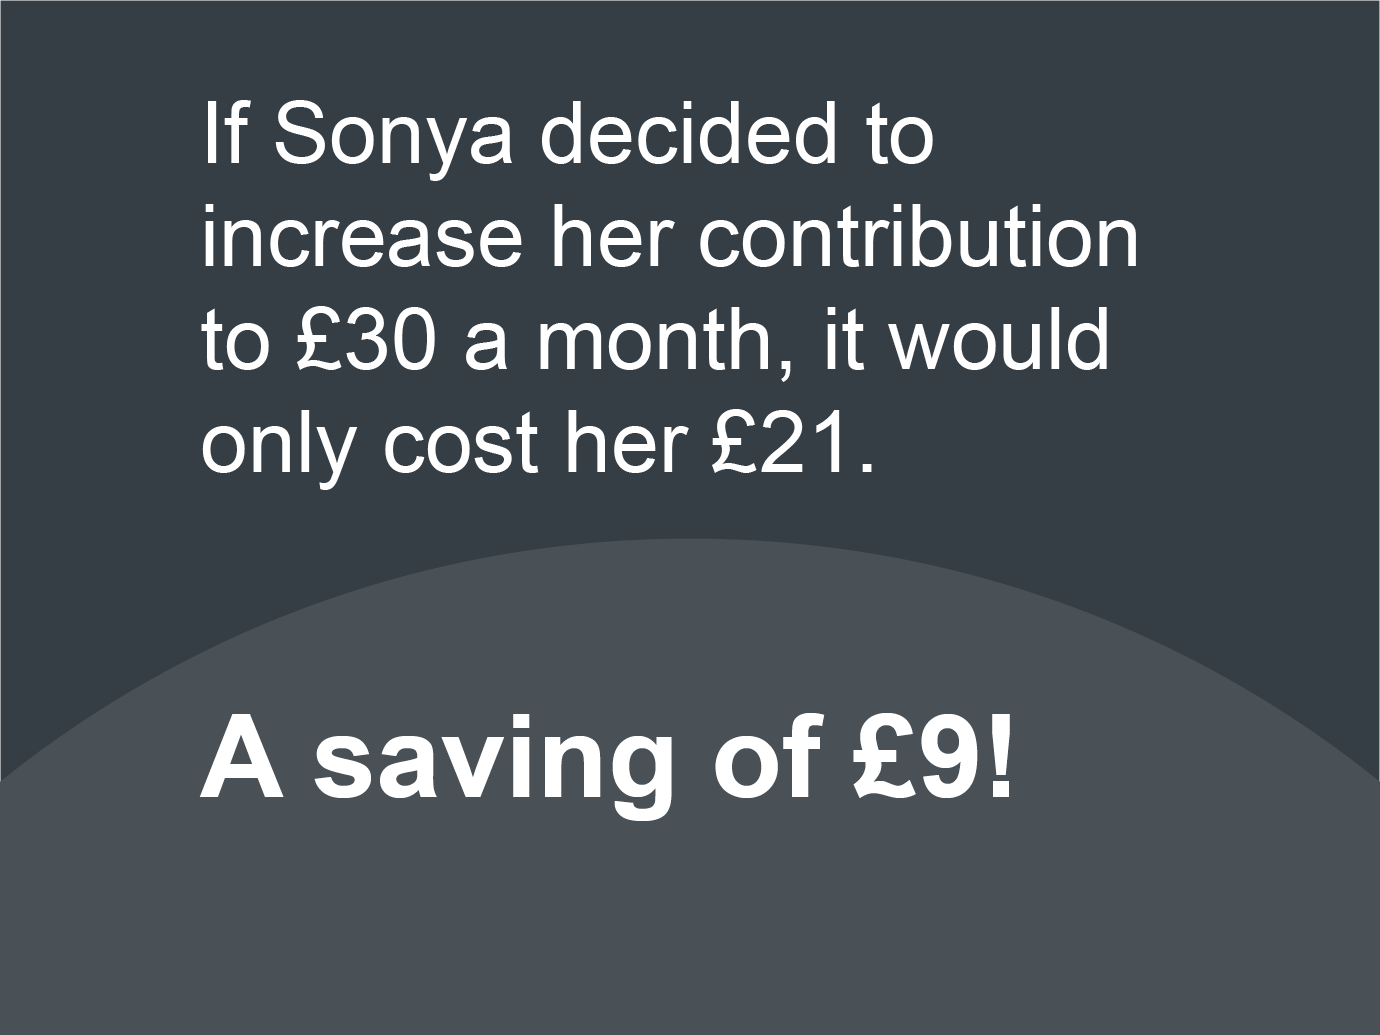 If Sonya decided to increase her contribution to £30 a month, it would only cost her £21. A saving of £9!